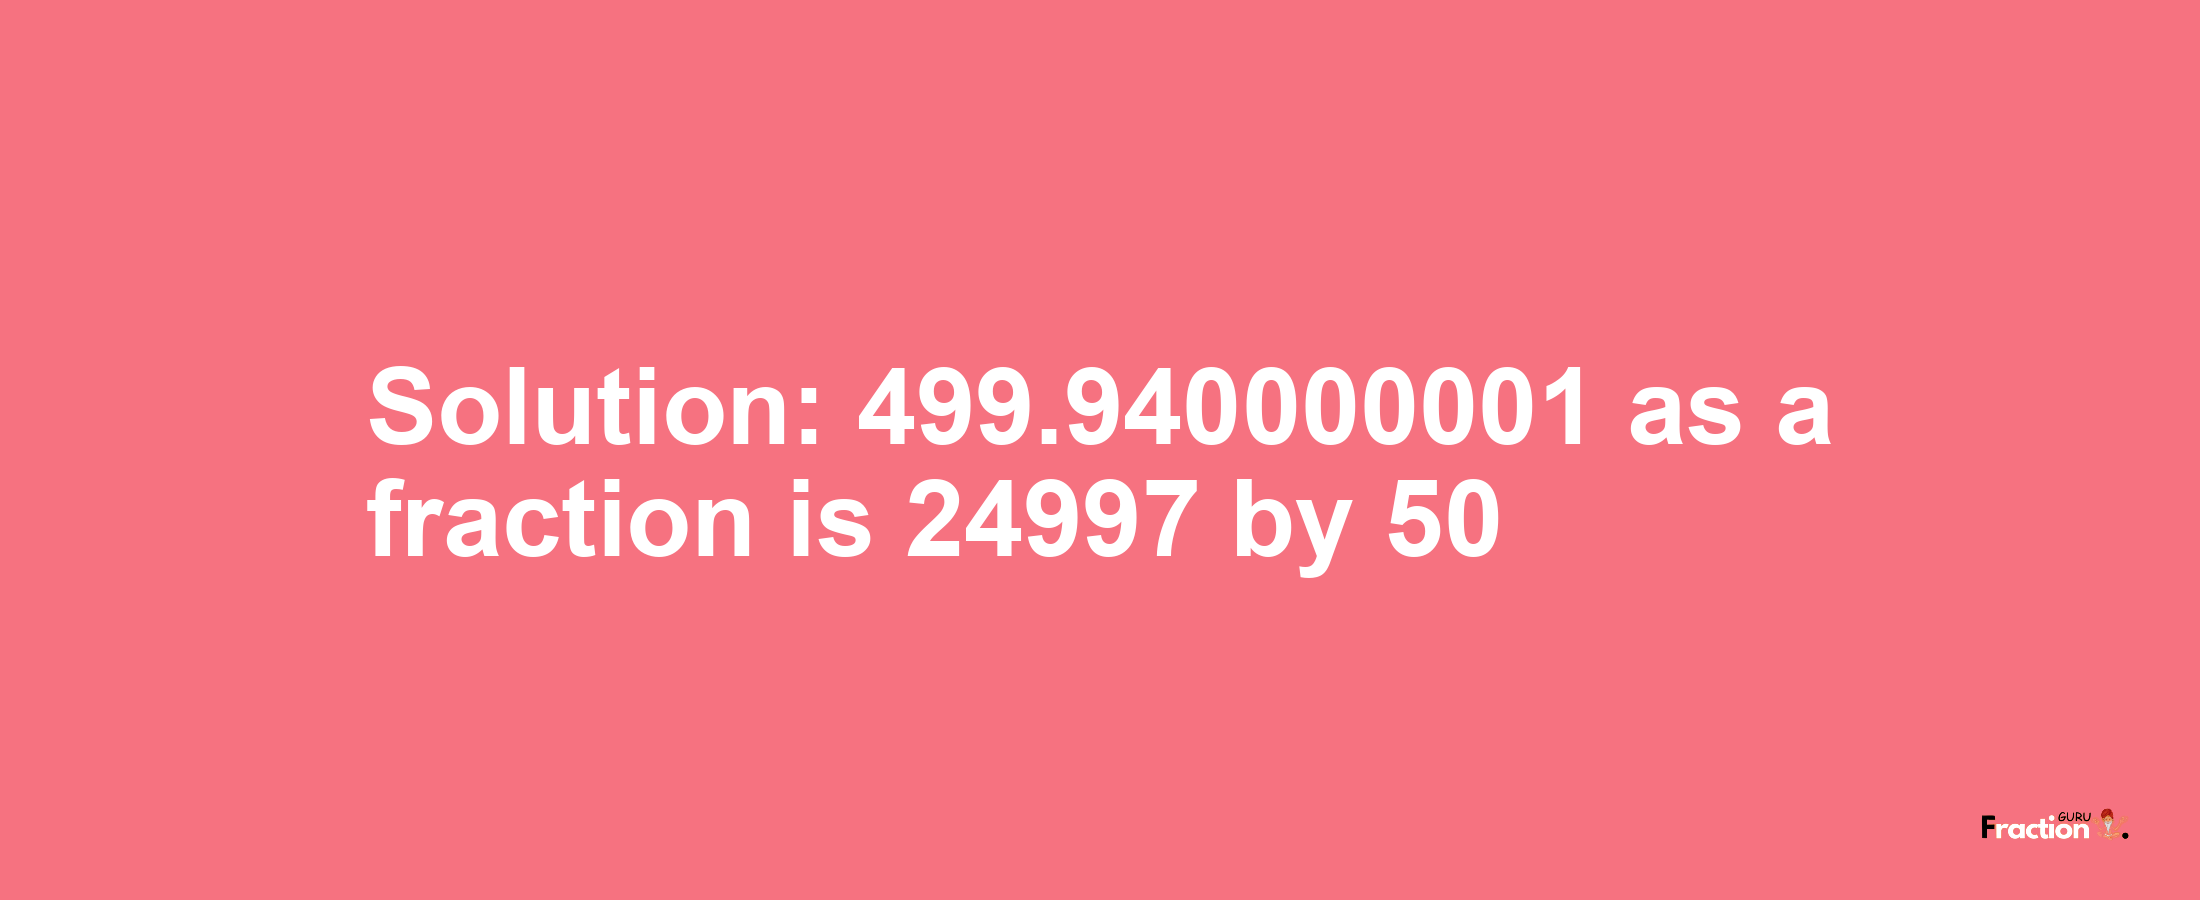 Solution:499.940000001 as a fraction is 24997/50